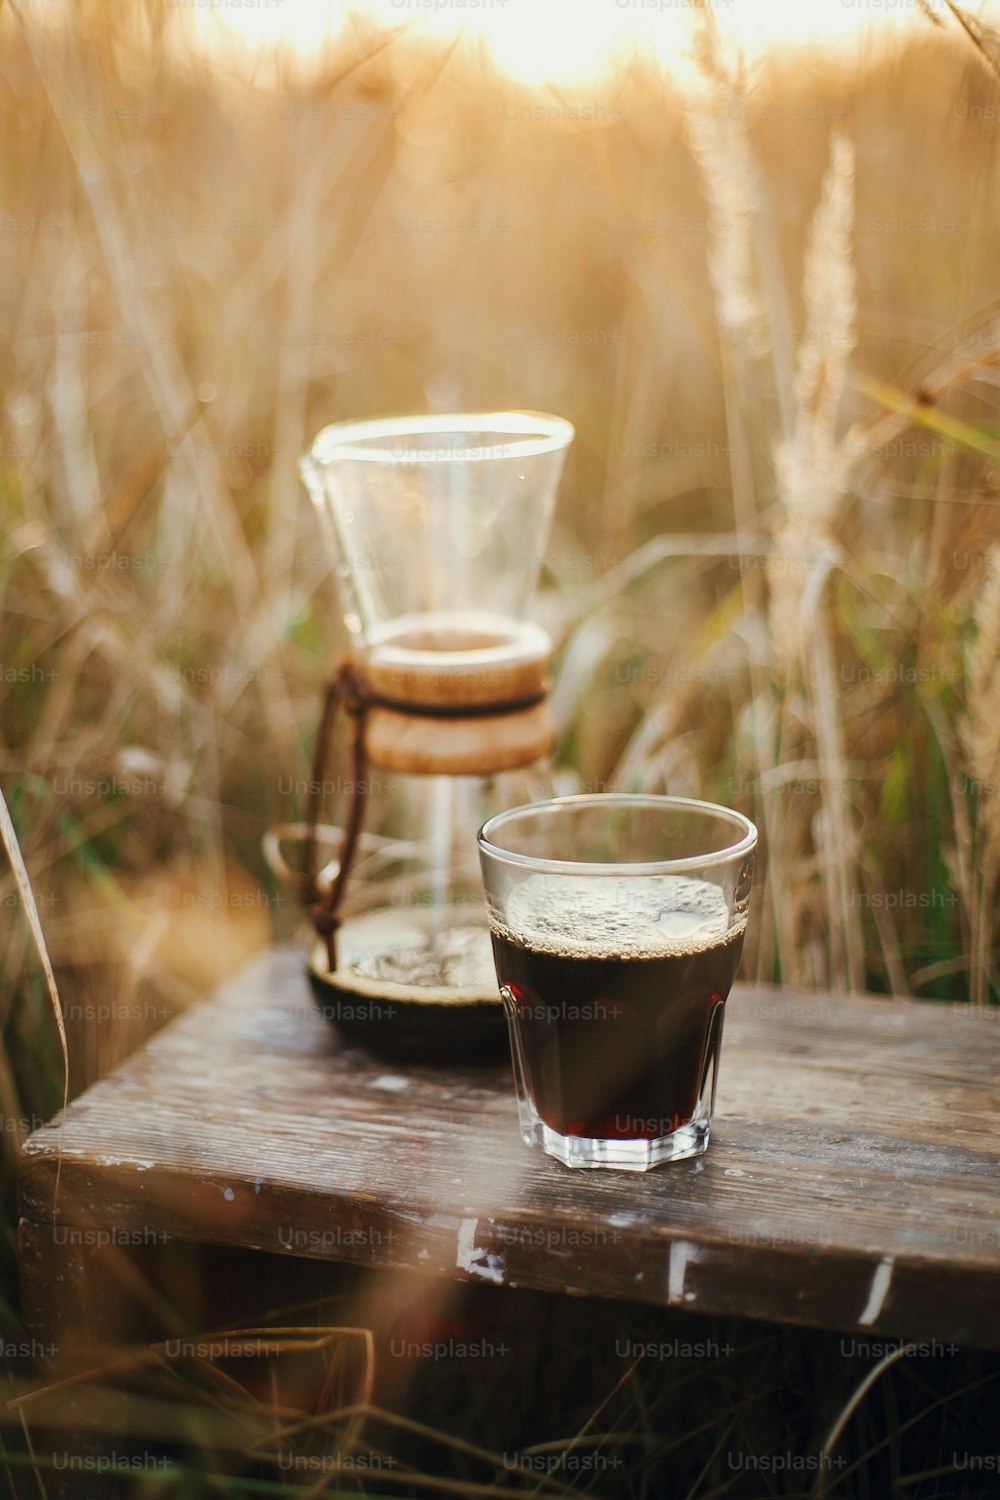 Alternative coffee brewing outdoors in travel. Hot coffee in glass cup and glass flask on background in sunny warm light in rural herbs. Atmospheric rustic tranquil moment. Vertical image